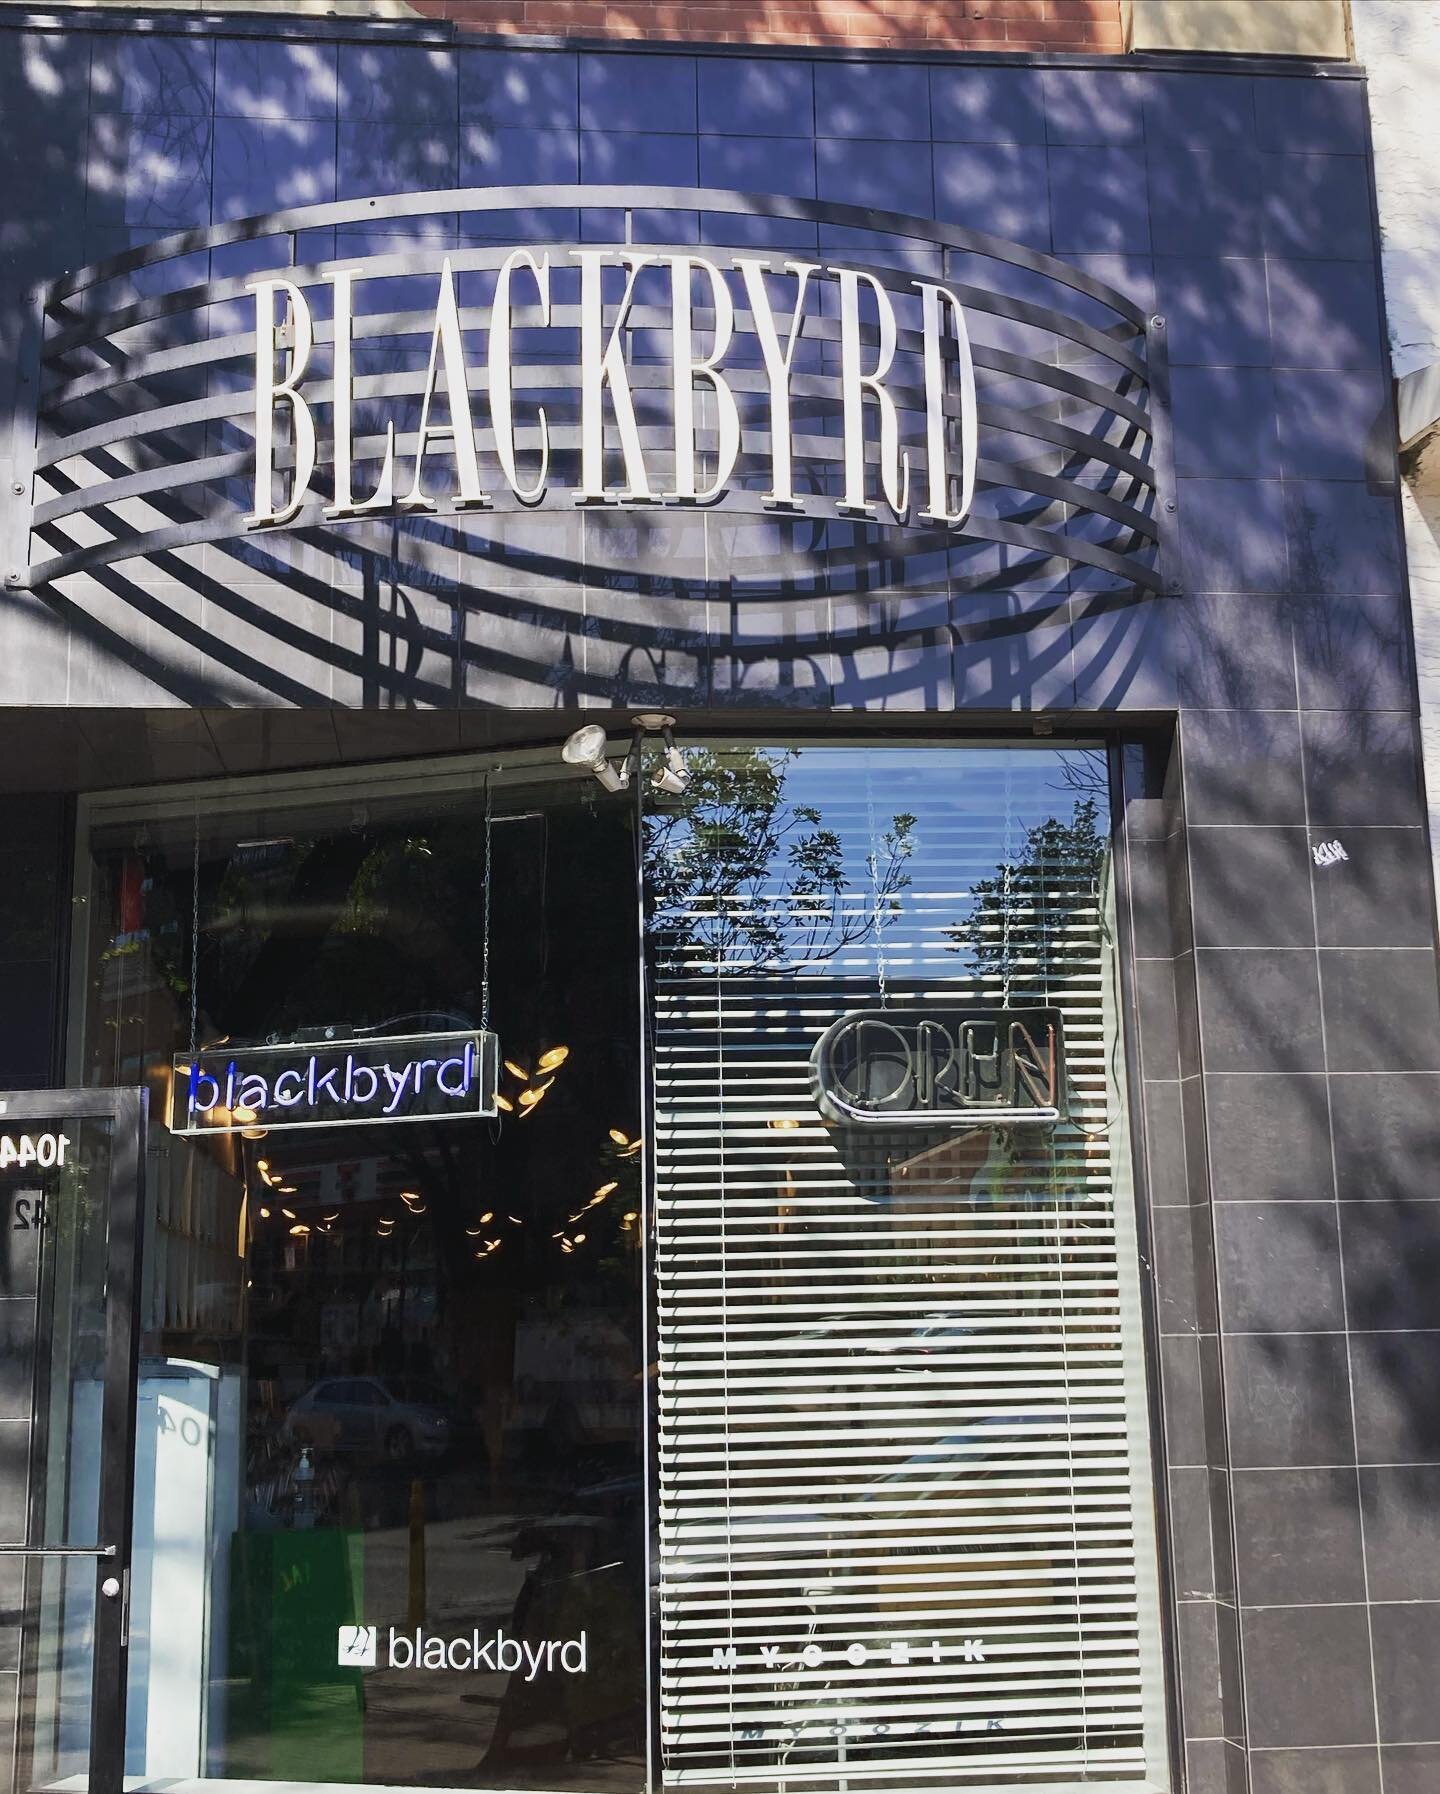 Edmonton! The fine folks at @blackbyrdmyoozik are stocked up and spinning our album #lightandshadow. Head down there and pick it up and check out this rad independent record shop! 

#vinyl #independent #recordstore #rockandroll #canadiana